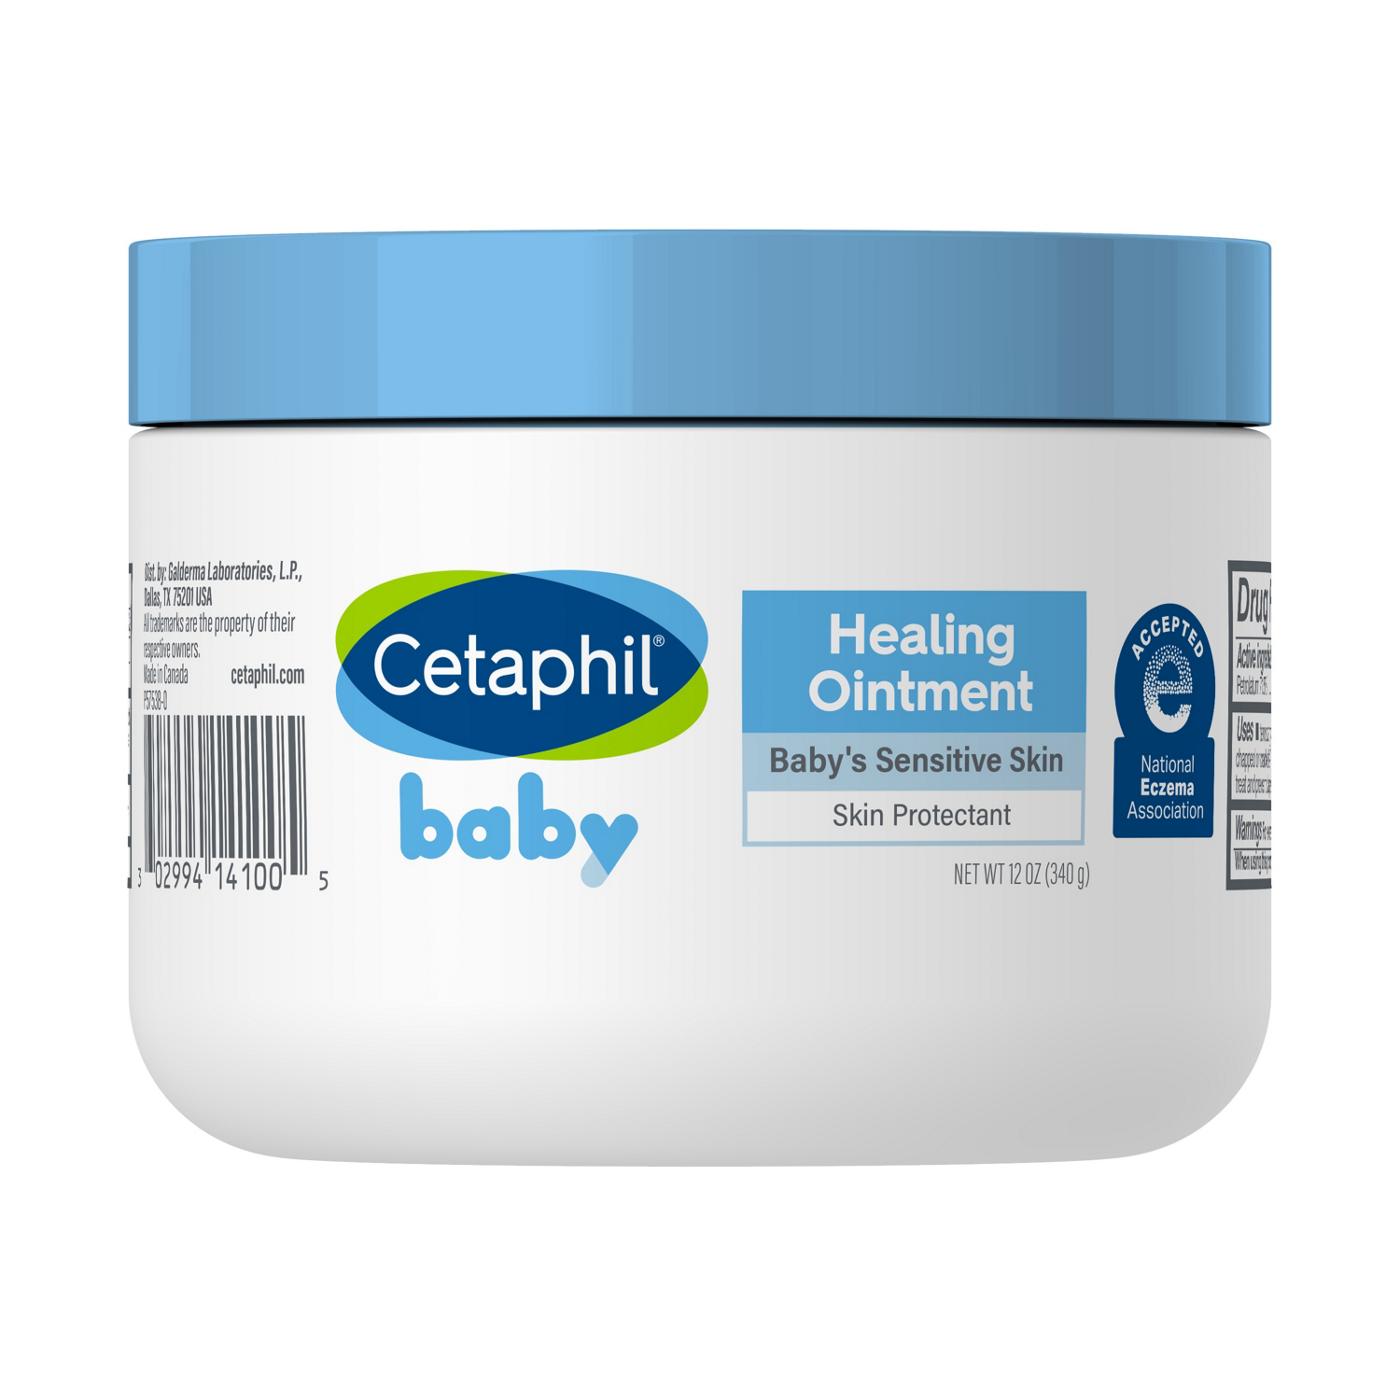 Cetaphil Baby Healing Ointment; image 1 of 3